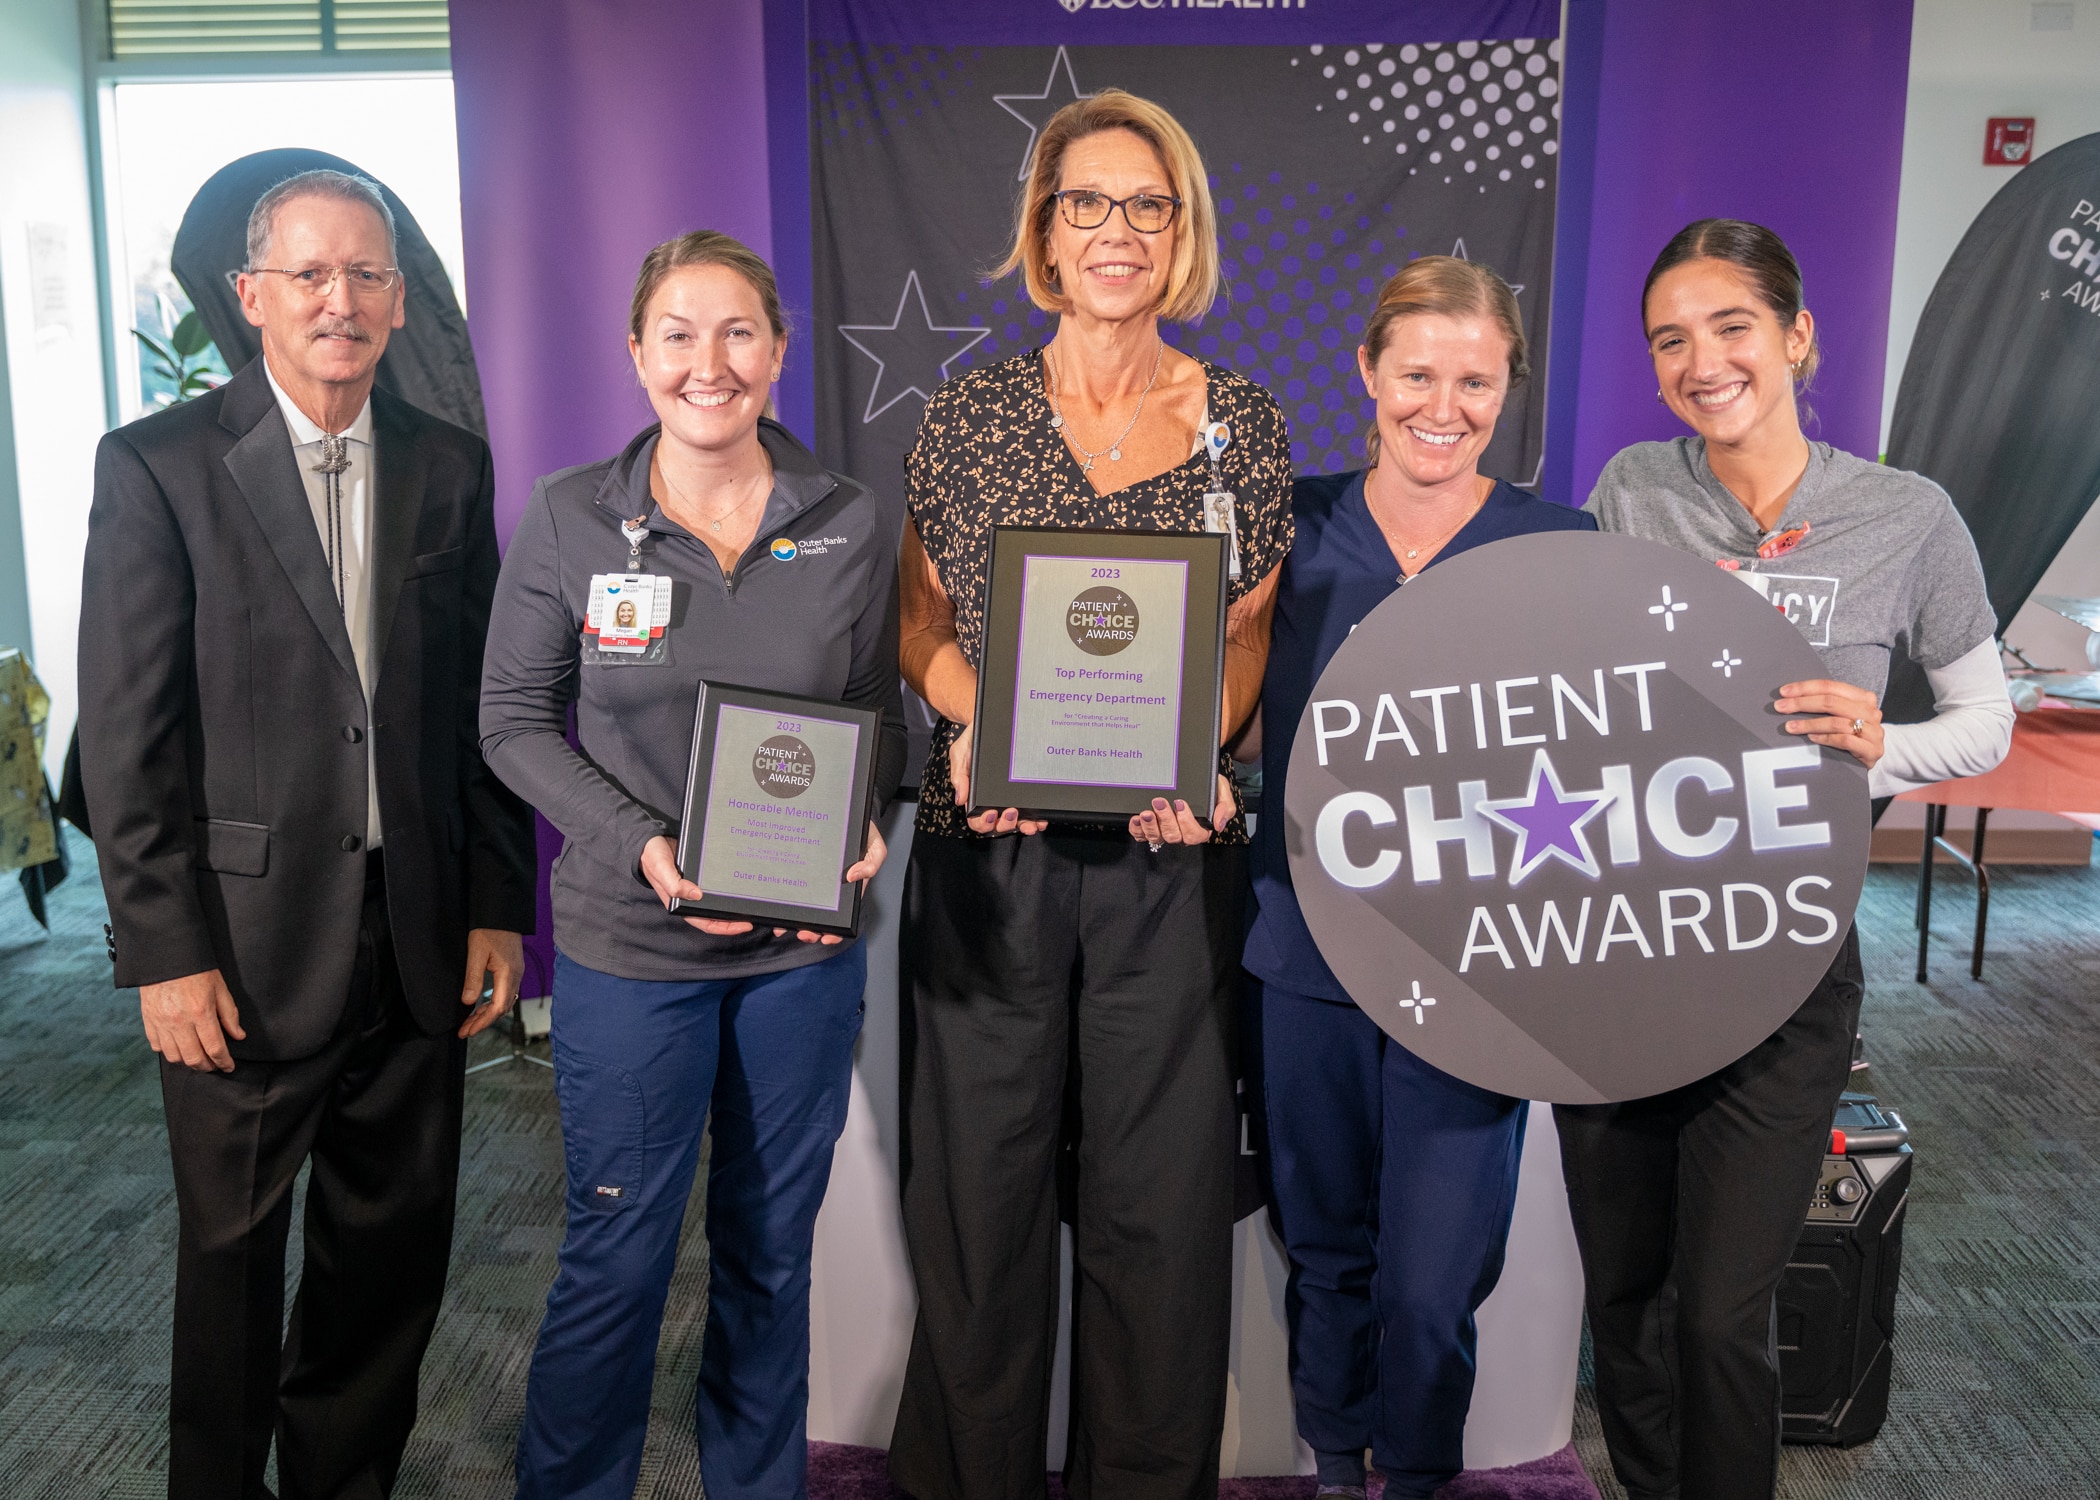 The Outer Banks Health Emergency Department team gathers together for a group photo to celebrate a pair of Patient Choice Awards.